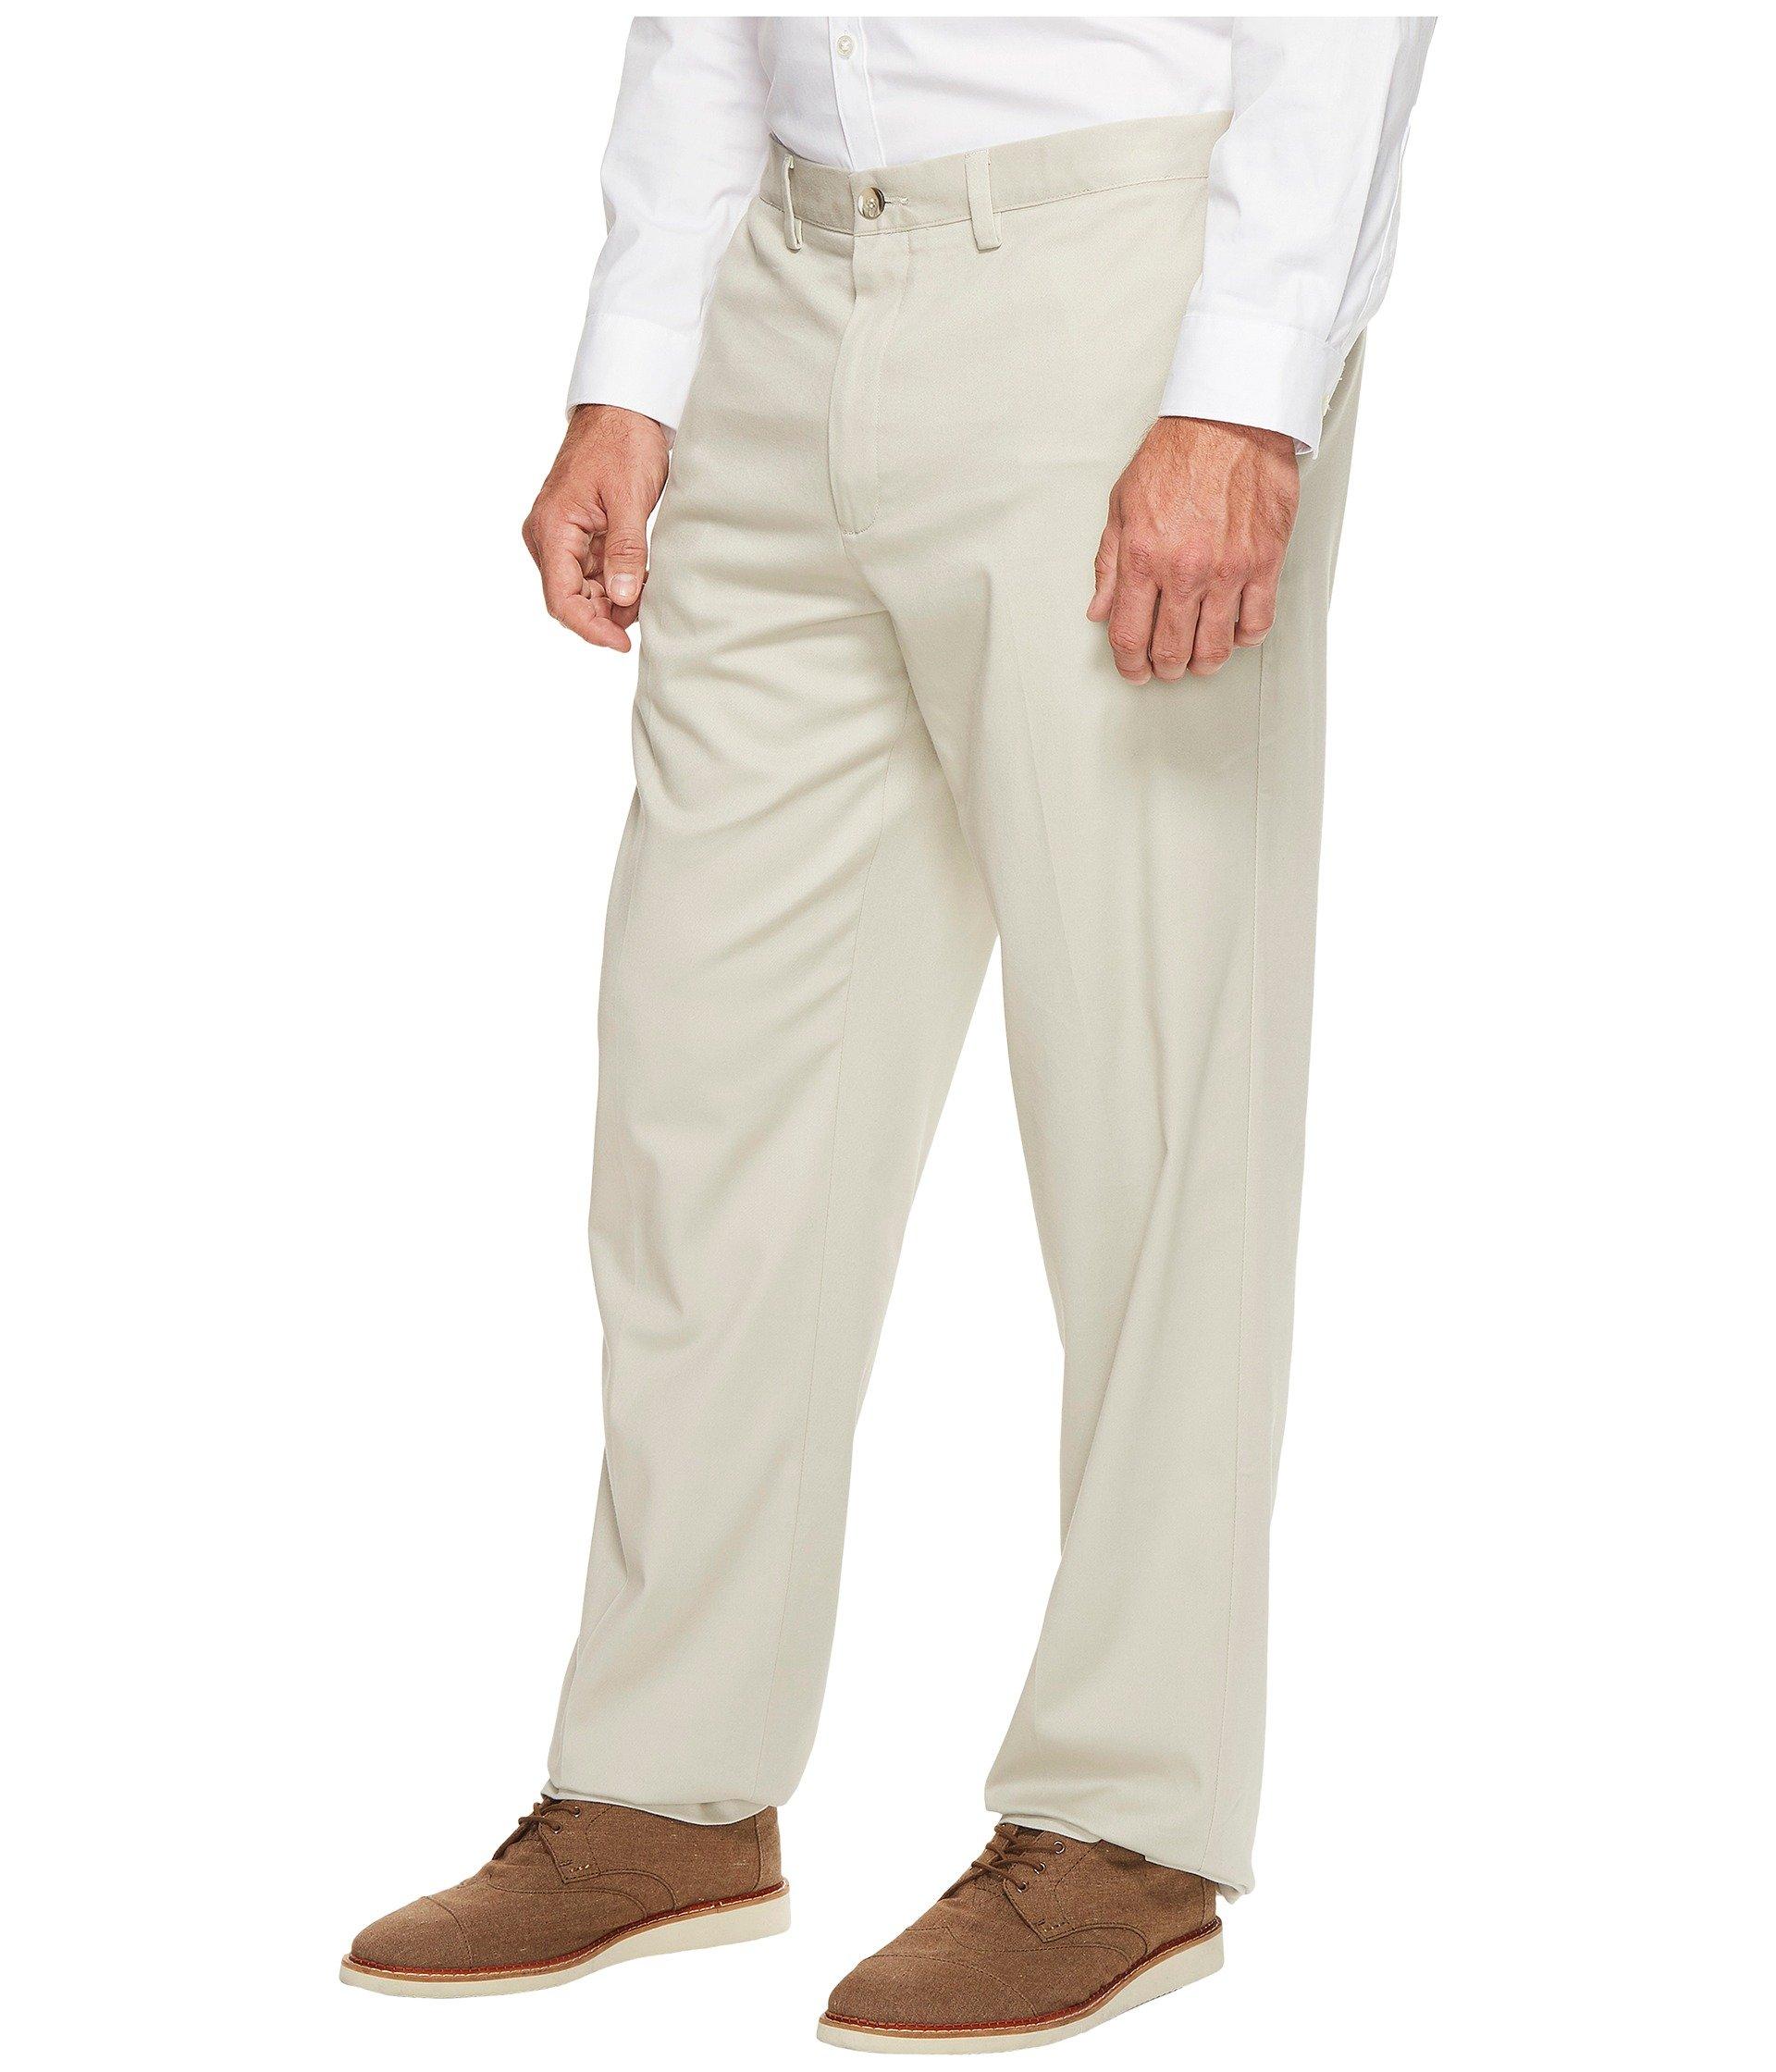 Dockers Cotton Big Tall Easy Khaki Pants in White for Men - Lyst